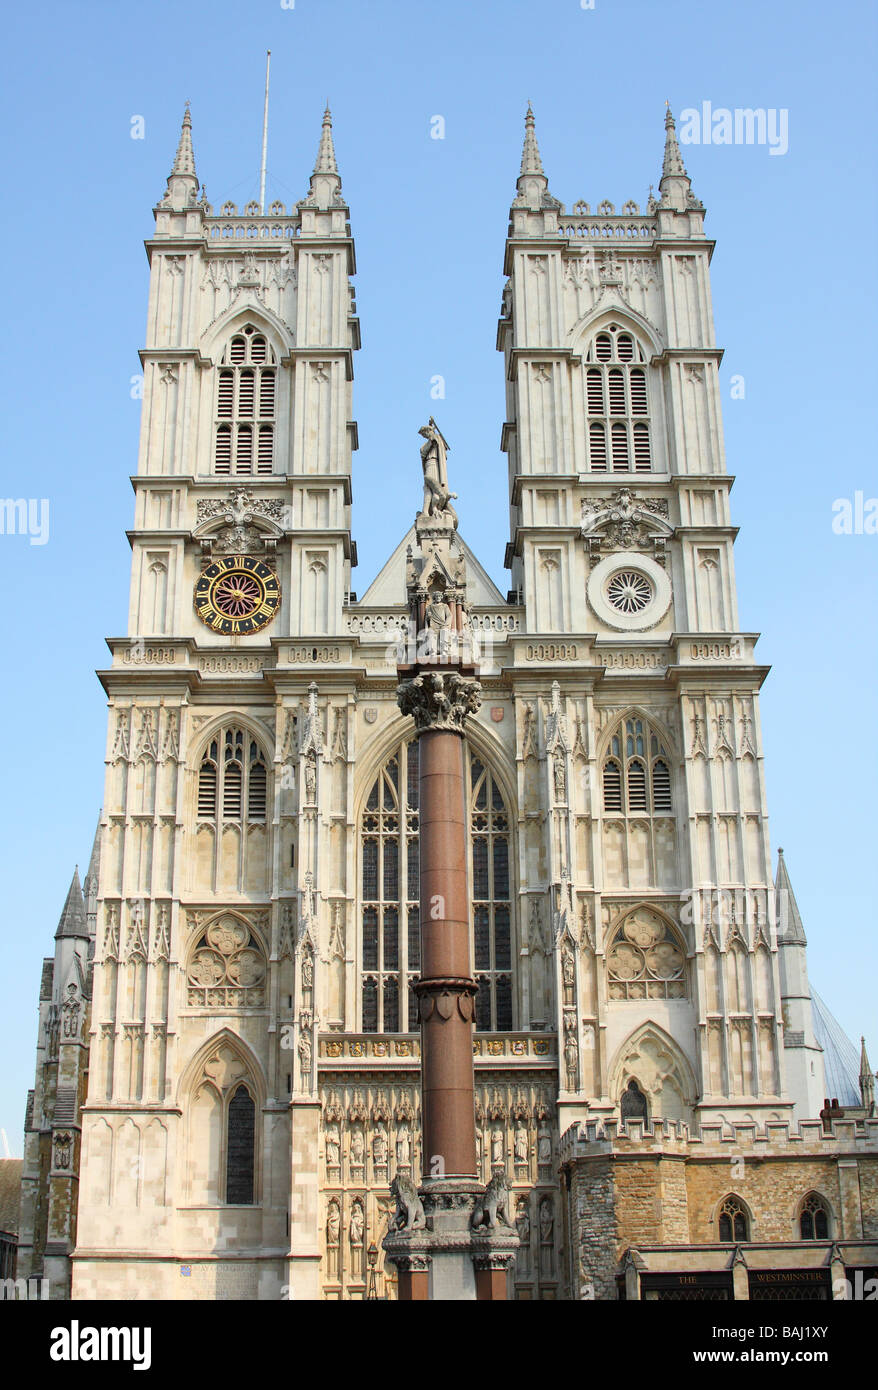 L'Abbaye de Westminster, Westminster, Londres, Angleterre, Royaume-Uni Banque D'Images